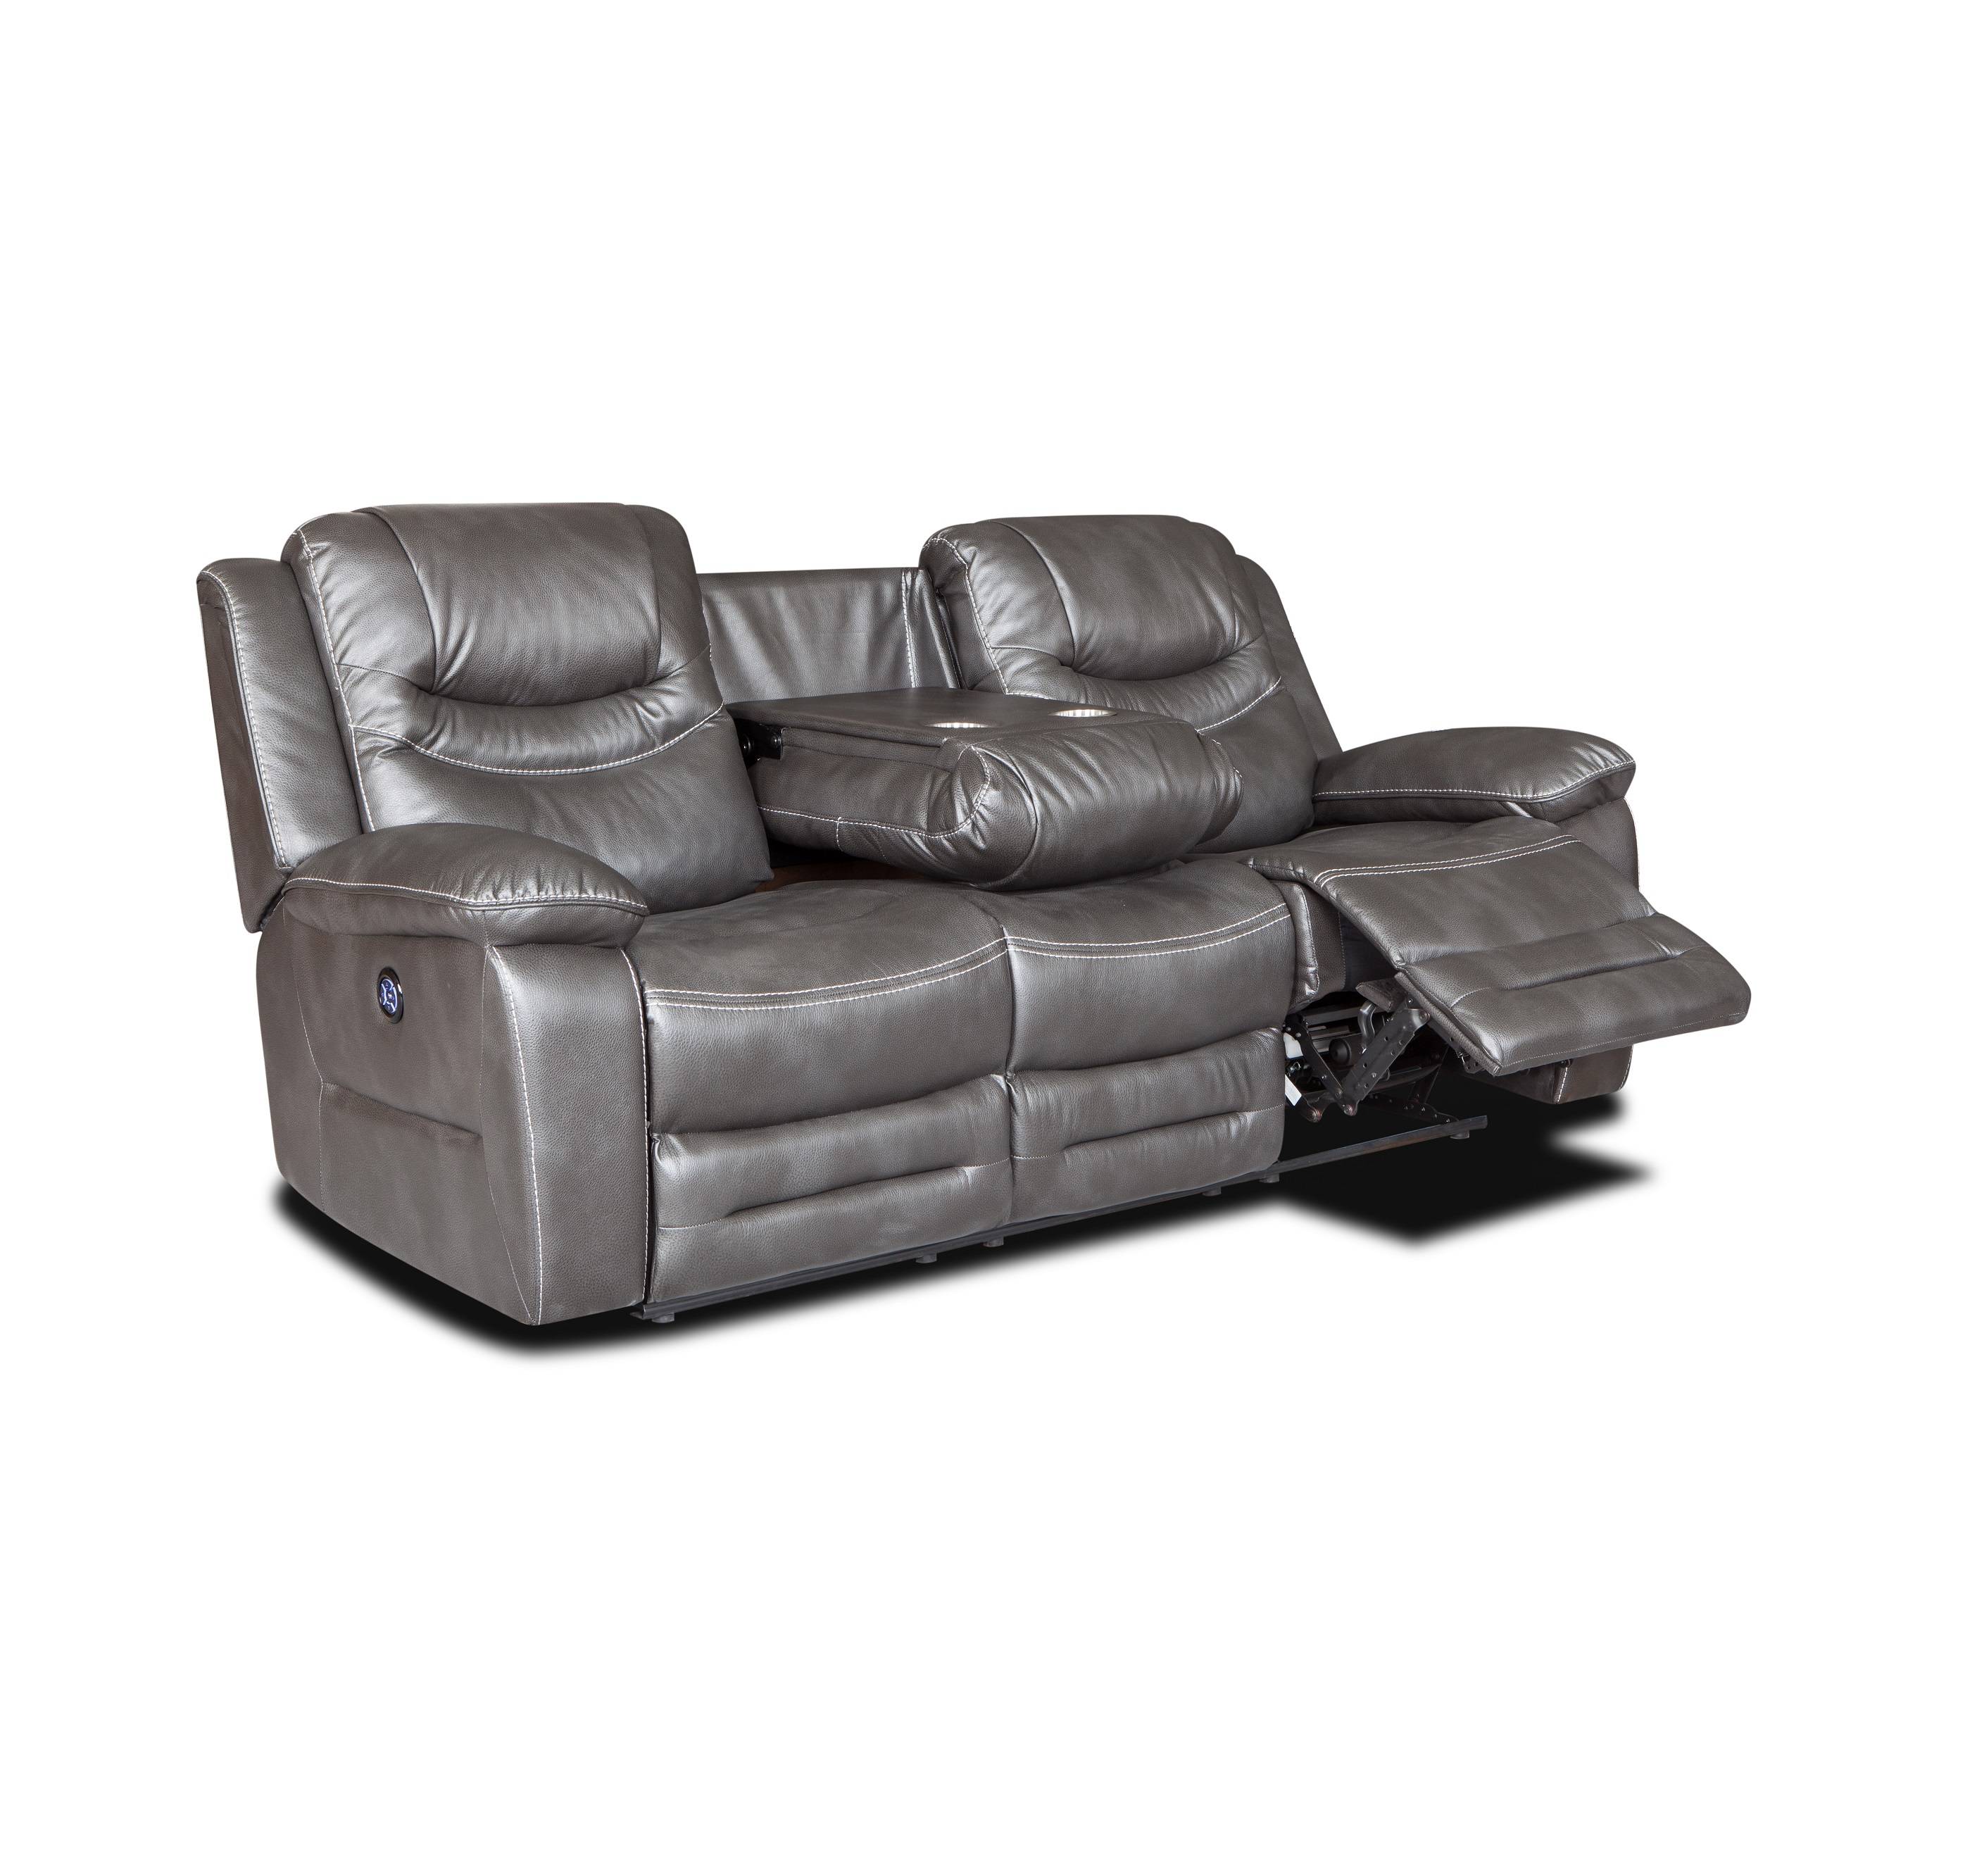 Chinese Professional Leather Recliner sofa - China Furniture Comfortable Genuine Leather Modern Electric Recliner Sofa – Chuan Yang